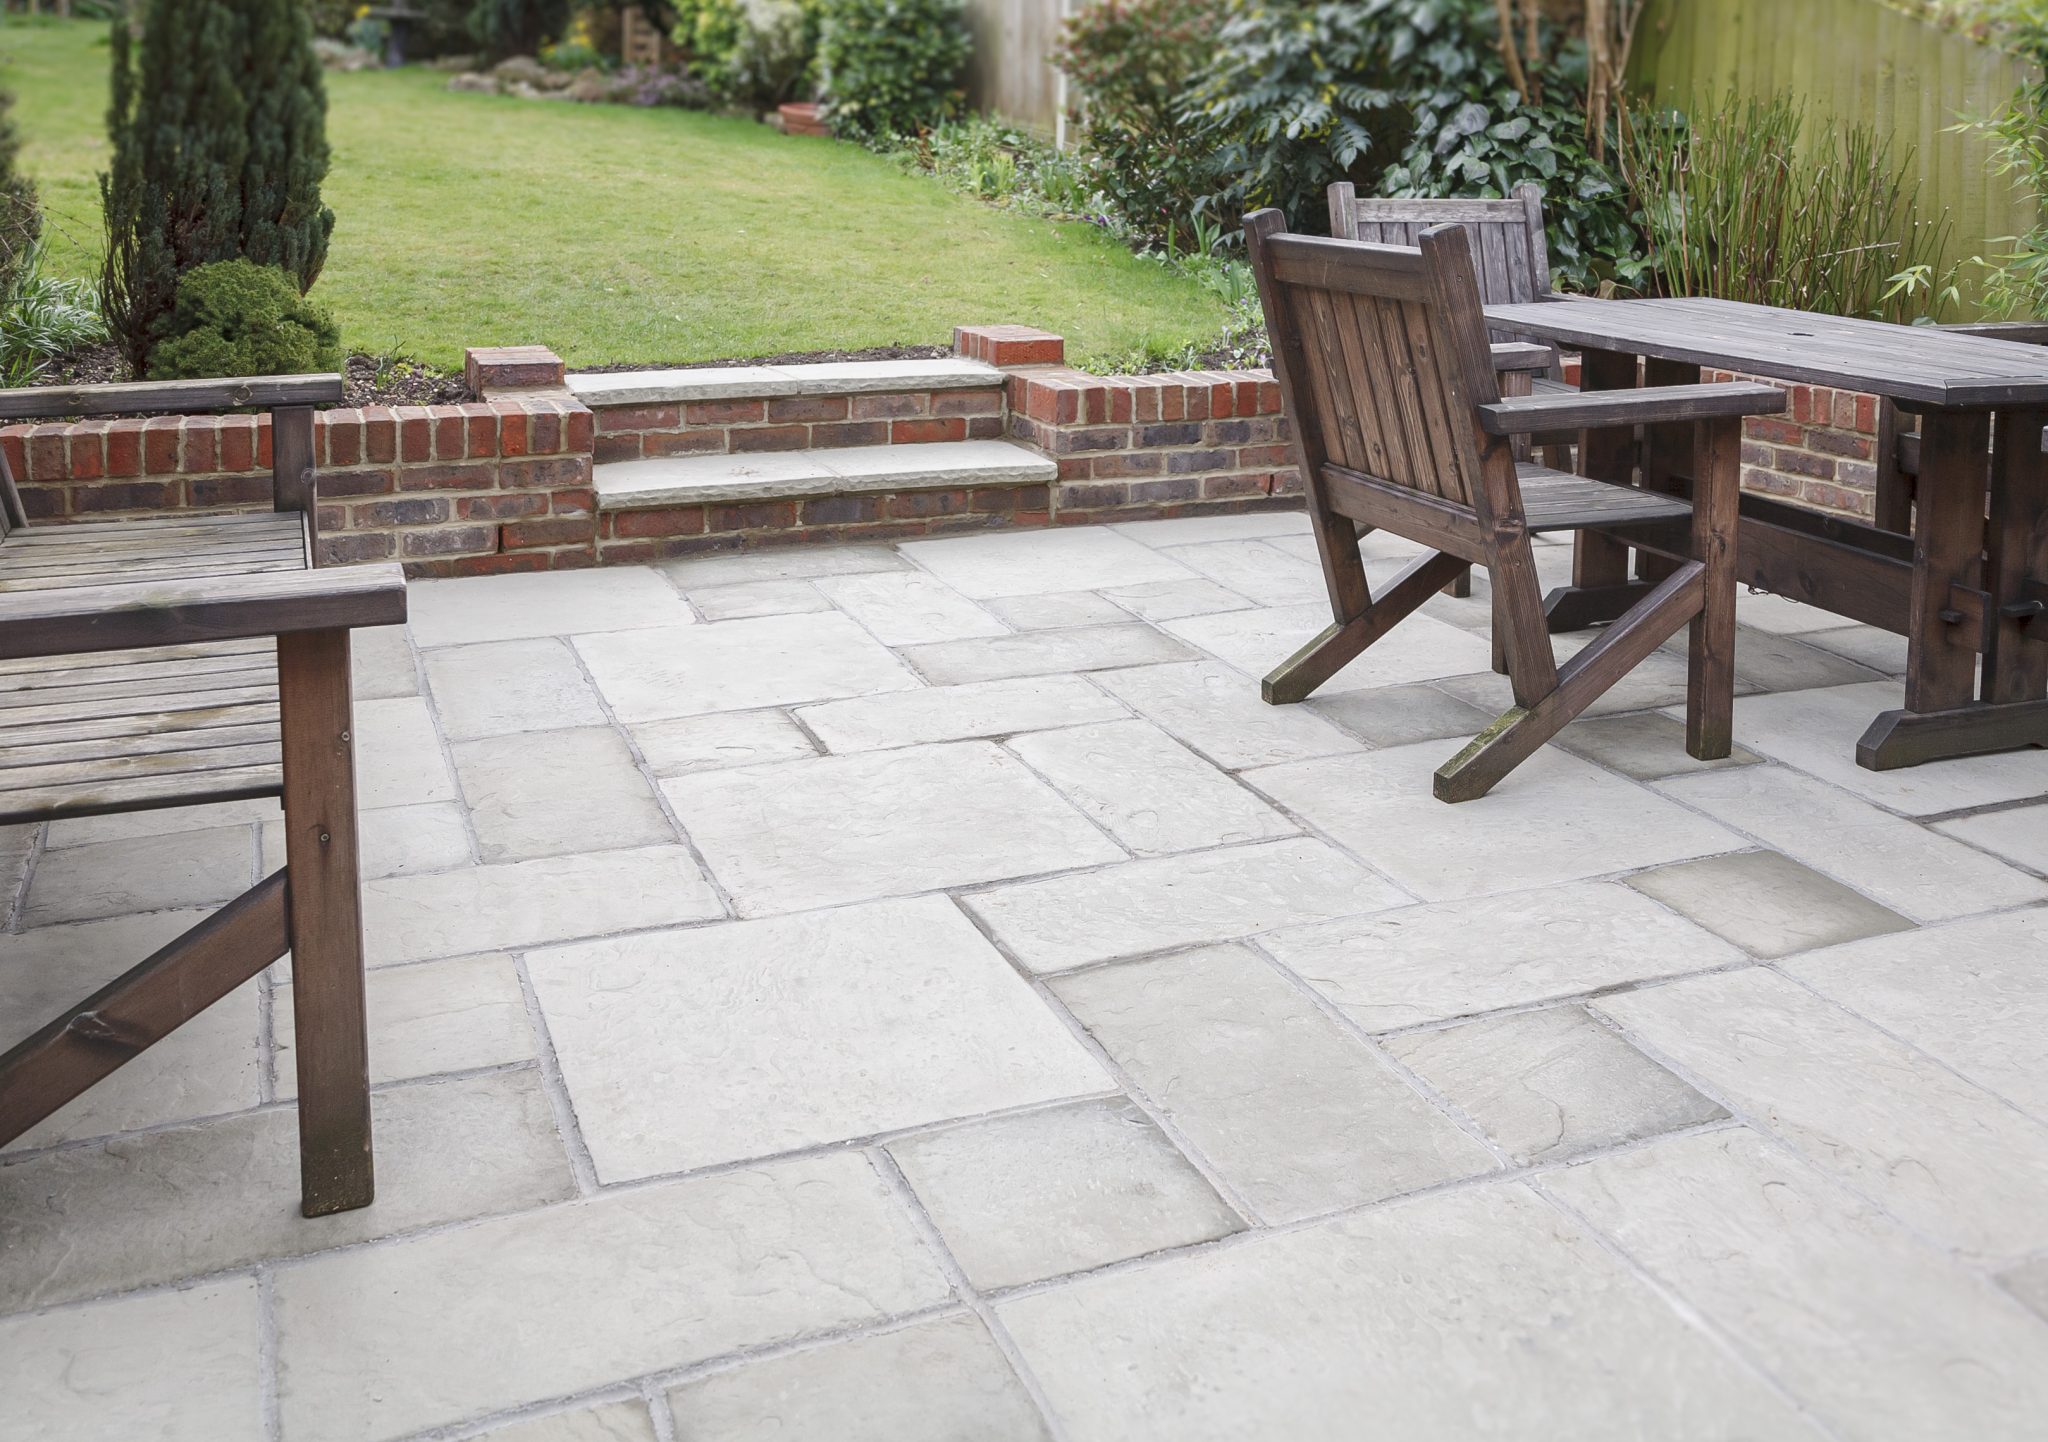 Can You Paint Patio Slabs Blog From, What Can I Use Instead Of Patio Slabs